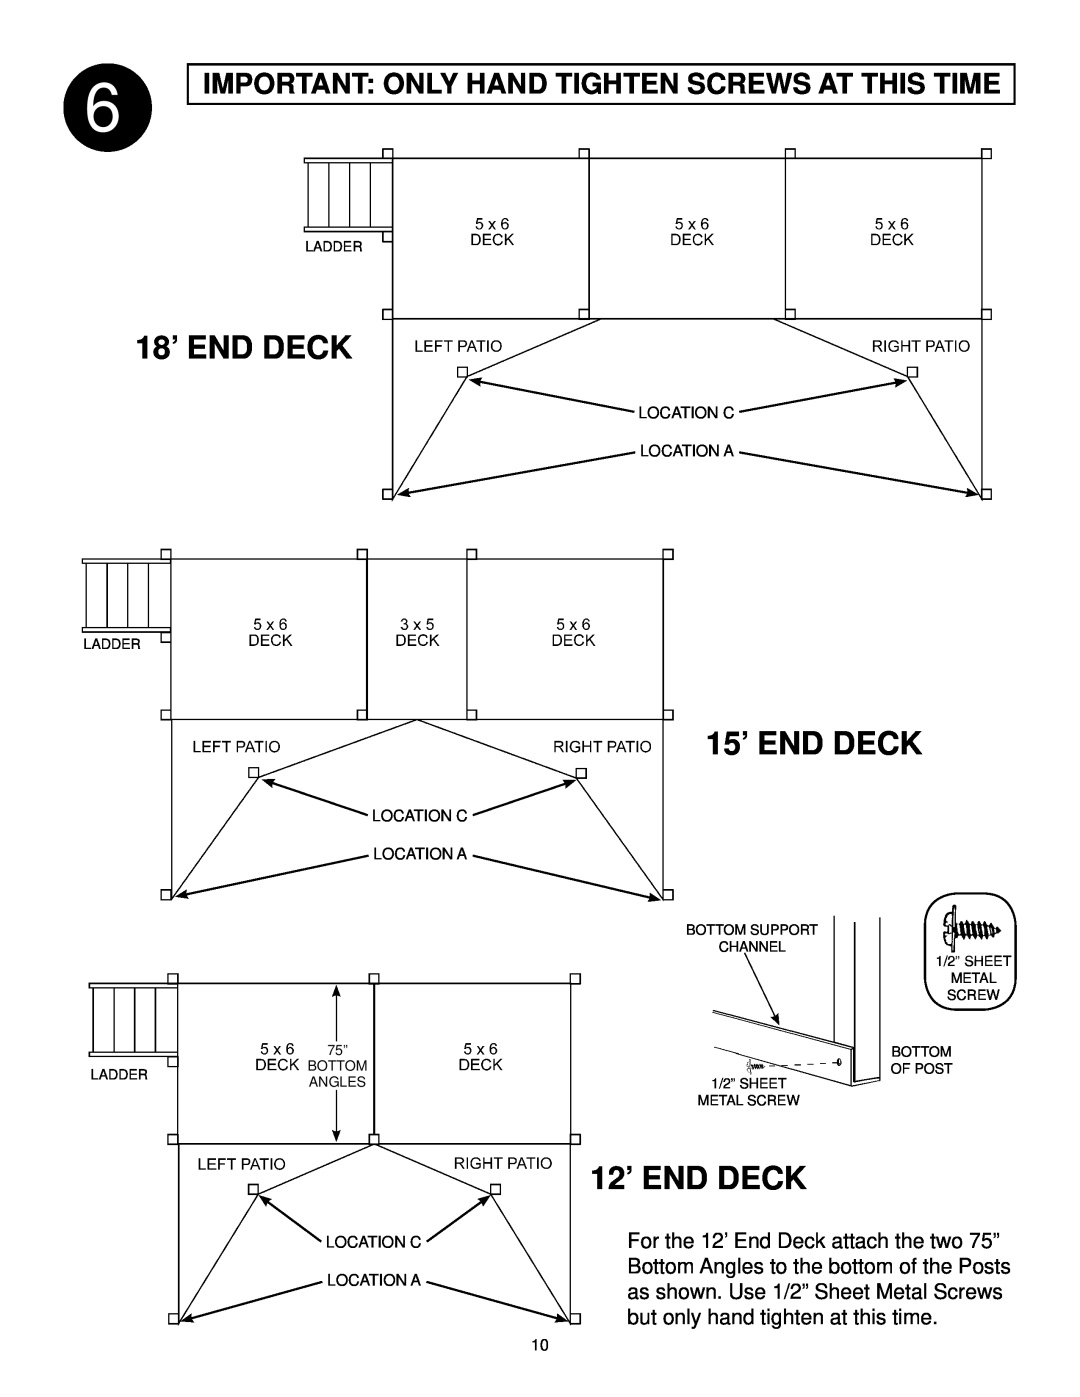 Swim'n Play end deck 18’ END DECK, 15’ END DECK, 12’ END DECK, Important: Only Hand Tighten Screws At This Time, Ladder 